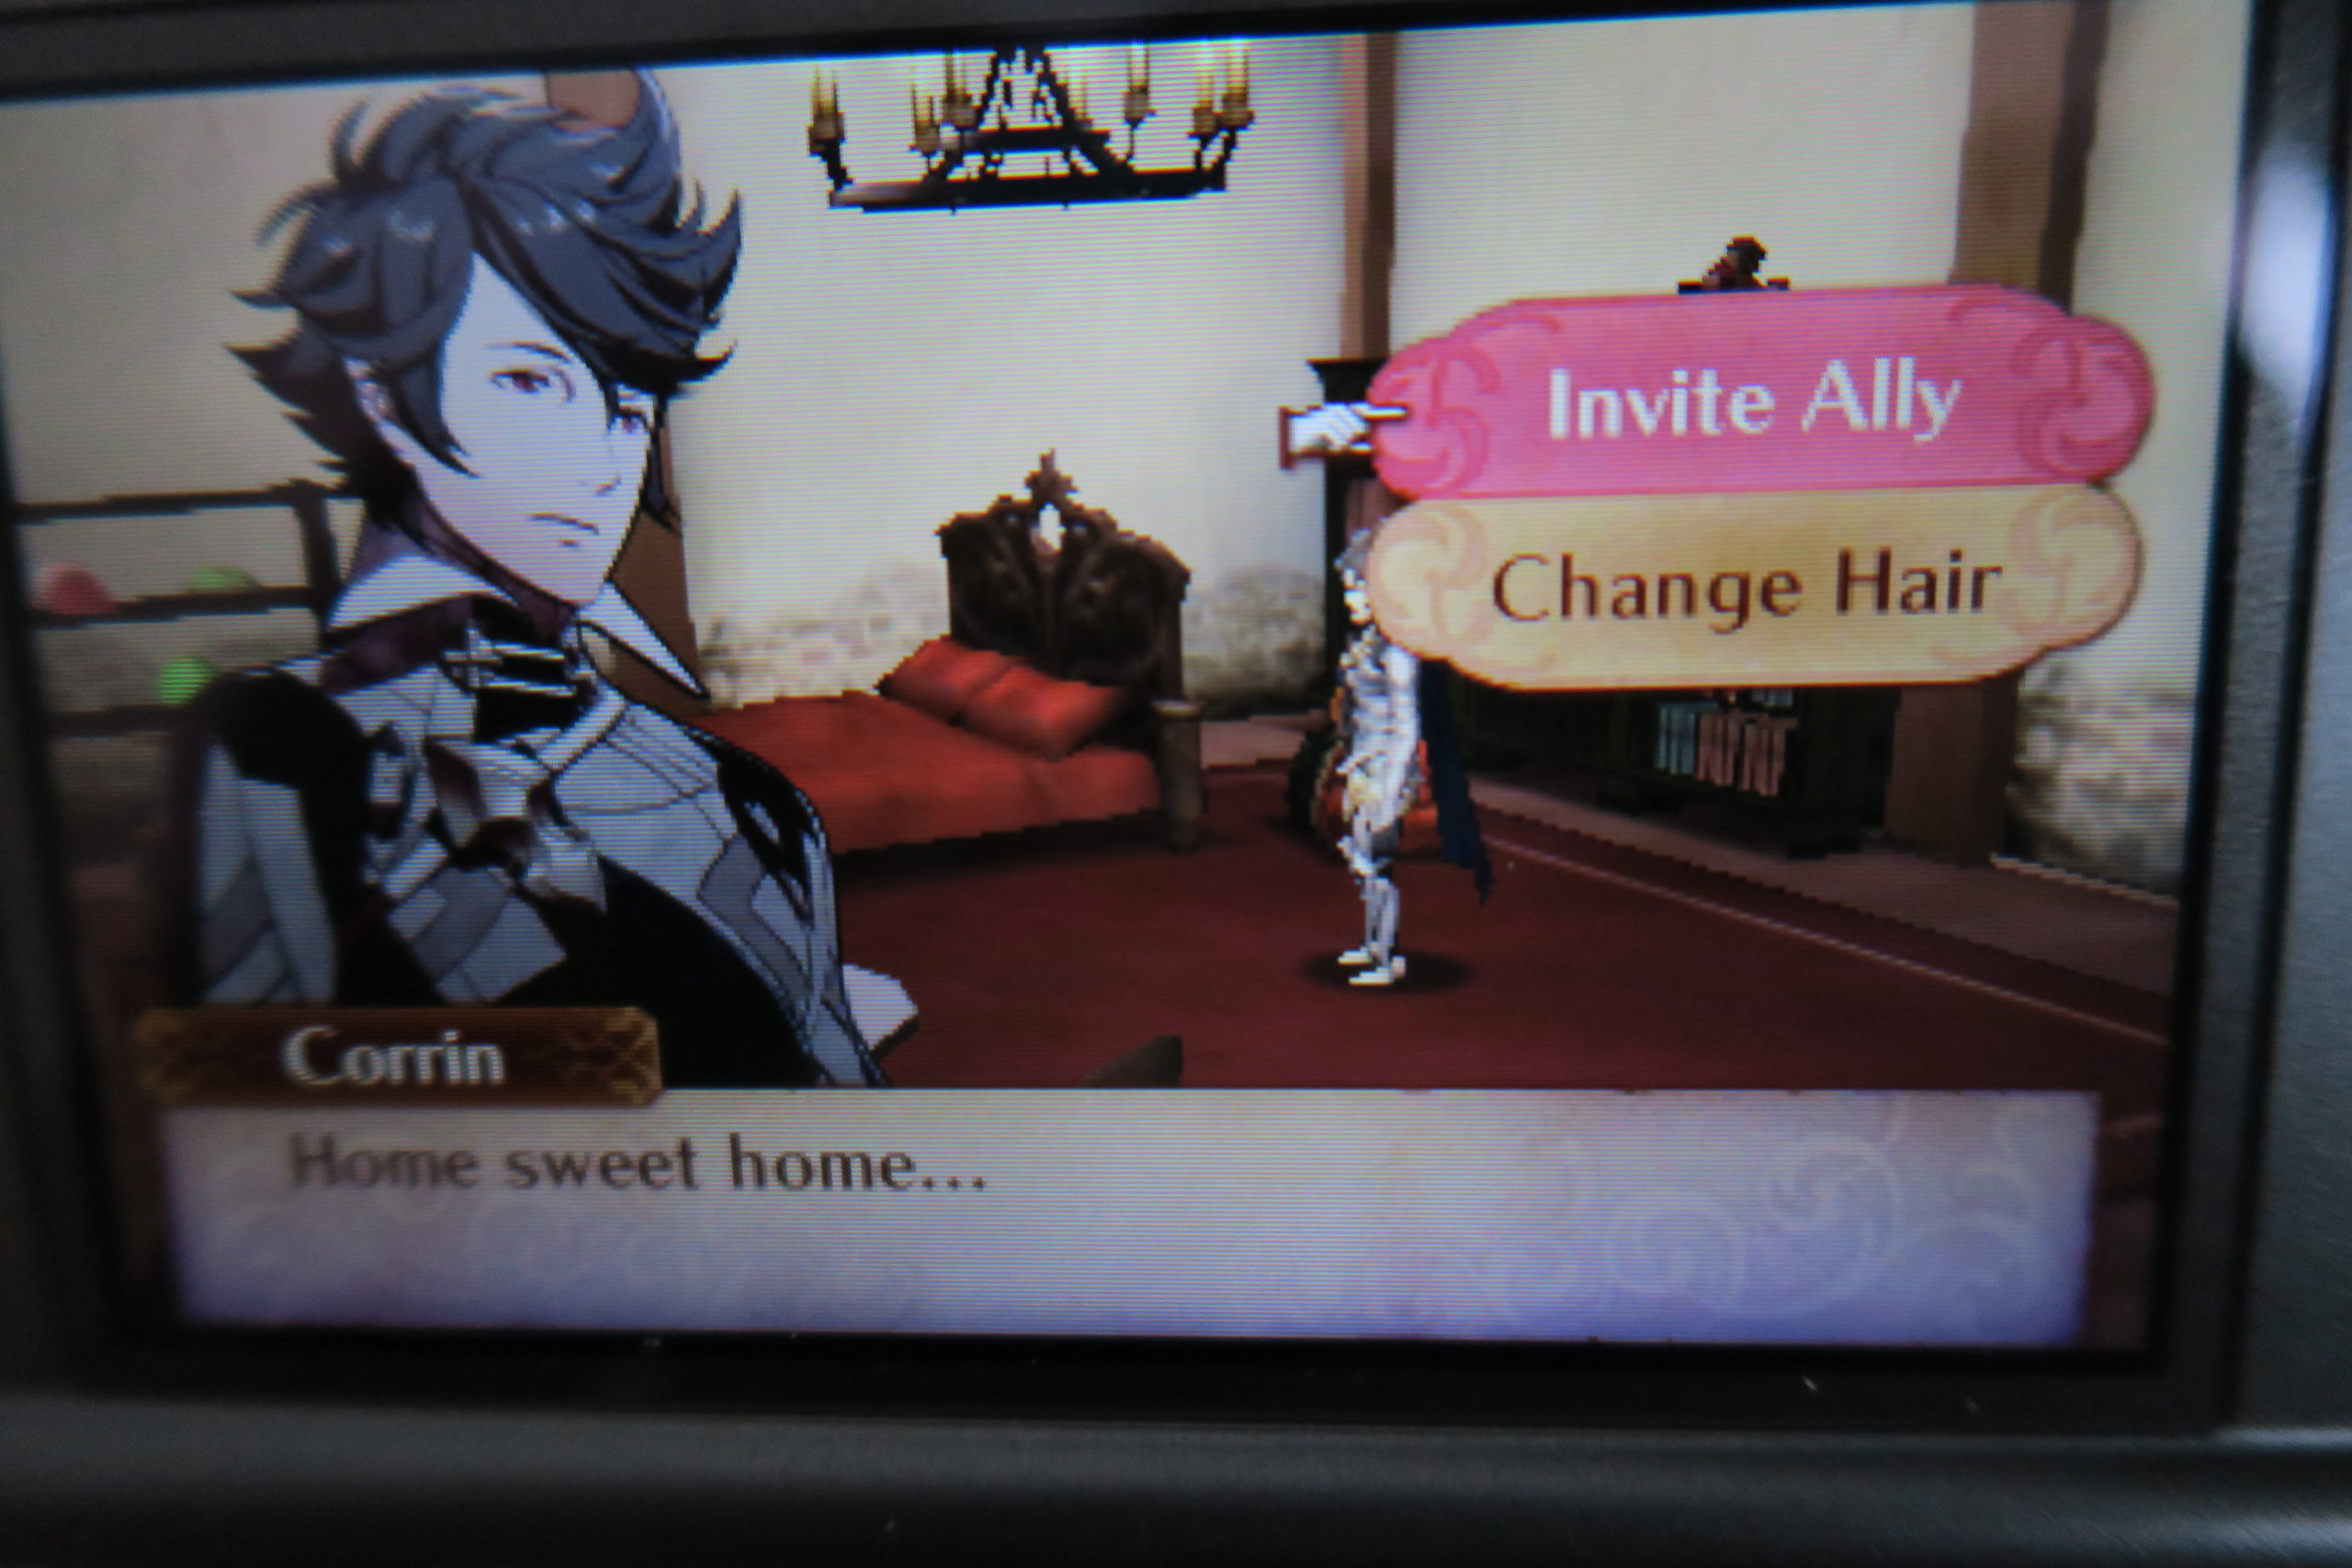 Western Version Of Fire Emblem Fates Ditches The Petting Mini-Game, Keeps The Talking